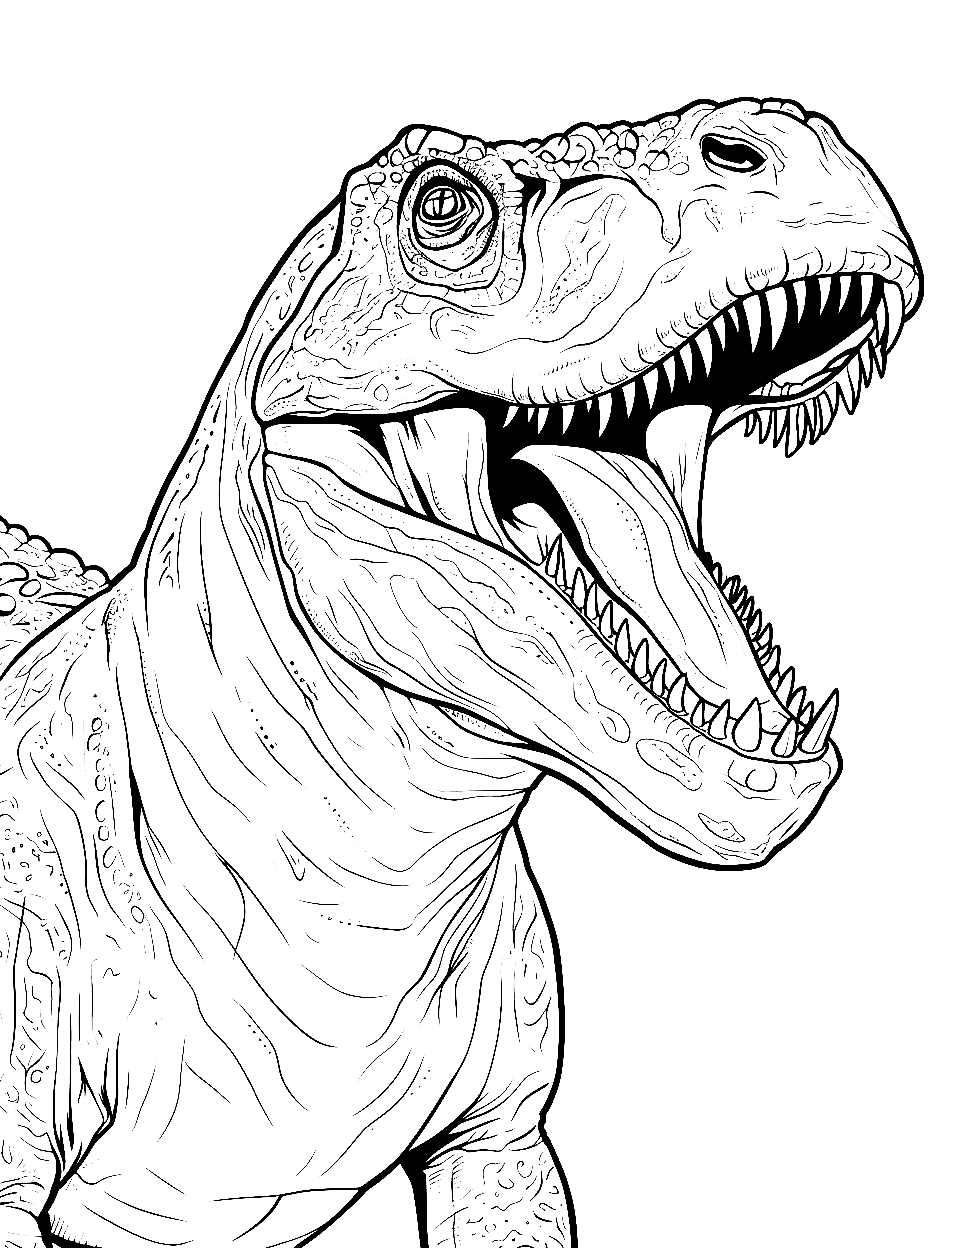 Realistic T Rex T-rex Coloring Page - A lifelike T-Rex with detailed scales and muscles.